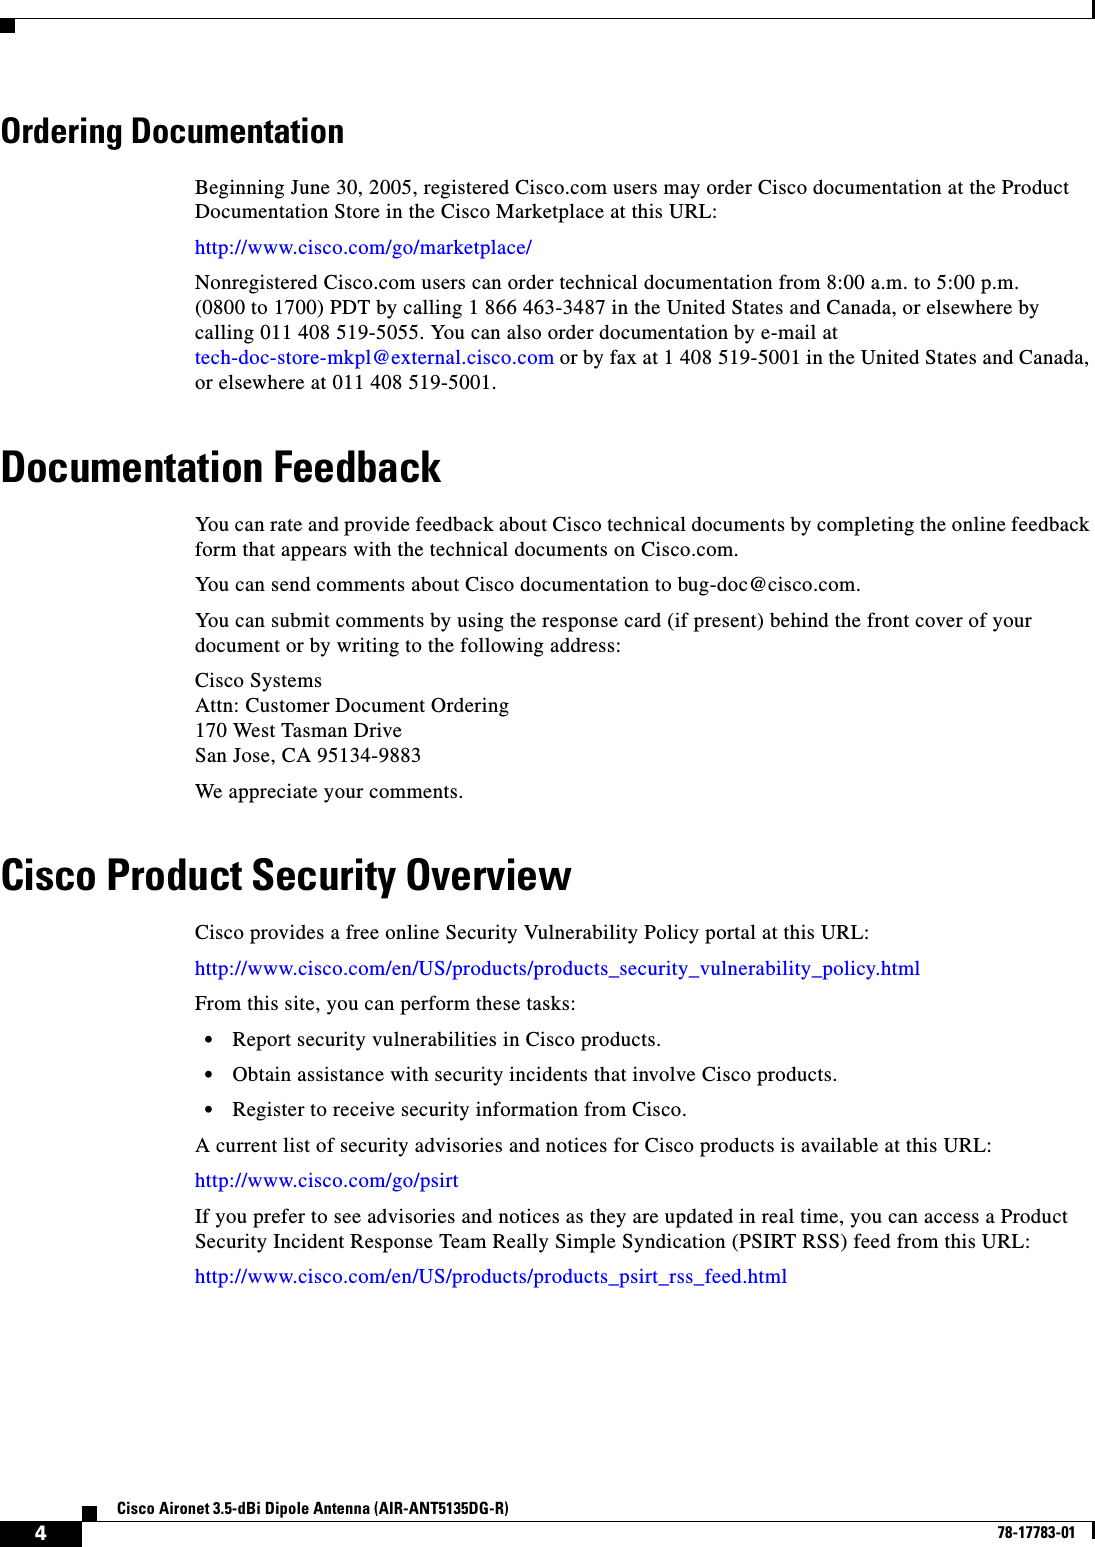   4Cisco Aironet 3.5-dBi Dipole Antenna (AIR-ANT5135DG-R)78-17783-01Ordering DocumentationBeginning June 30, 2005, registered Cisco.com users may order Cisco documentation at the Product Documentation Store in the Cisco Marketplace at this URL:http://www.cisco.com/go/marketplace/Nonregistered Cisco.com users can order technical documentation from 8:00 a.m. to 5:00 p.m. (0800 to 1700) PDT by calling 1 866 463-3487 in the United States and Canada, or elsewhere by calling 011 408 519-5055. You can also order documentation by e-mail at tech-doc-store-mkpl@external.cisco.com or by fax at 1 408 519-5001 in the United States and Canada, or elsewhere at 011 408 519-5001.Documentation FeedbackYou can rate and provide feedback about Cisco technical documents by completing the online feedback form that appears with the technical documents on Cisco.com.You can send comments about Cisco documentation to bug-doc@cisco.com.You can submit comments by using the response card (if present) behind the front cover of your document or by writing to the following address:Cisco SystemsAttn: Customer Document Ordering170 West Tasman DriveSan Jose, CA 95134-9883We appreciate your comments.Cisco Product Security OverviewCisco provides a free online Security Vulnerability Policy portal at this URL:http://www.cisco.com/en/US/products/products_security_vulnerability_policy.htmlFrom this site, you can perform these tasks:•Report security vulnerabilities in Cisco products.•Obtain assistance with security incidents that involve Cisco products.•Register to receive security information from Cisco.A current list of security advisories and notices for Cisco products is available at this URL:http://www.cisco.com/go/psirtIf you prefer to see advisories and notices as they are updated in real time, you can access a Product Security Incident Response Team Really Simple Syndication (PSIRT RSS) feed from this URL:http://www.cisco.com/en/US/products/products_psirt_rss_feed.html